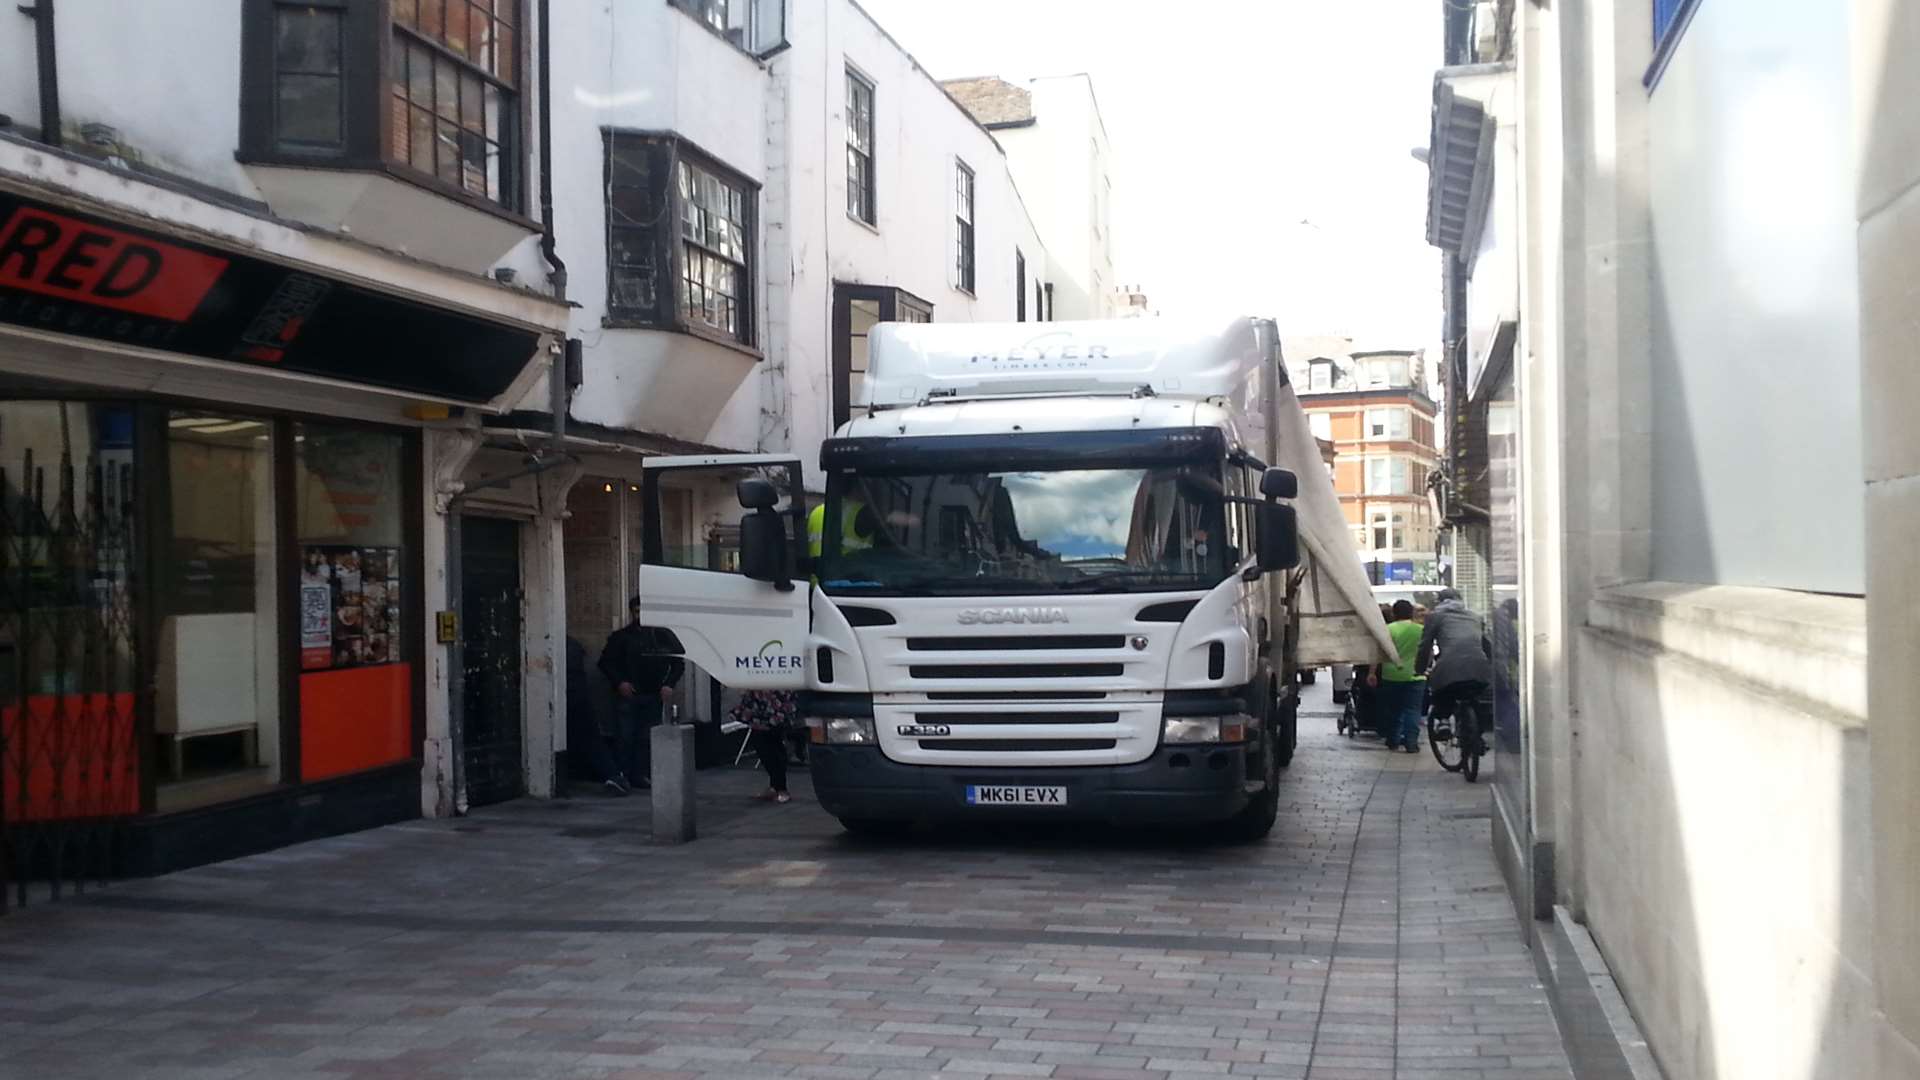 The lorry found Bank Street a tight squeeze